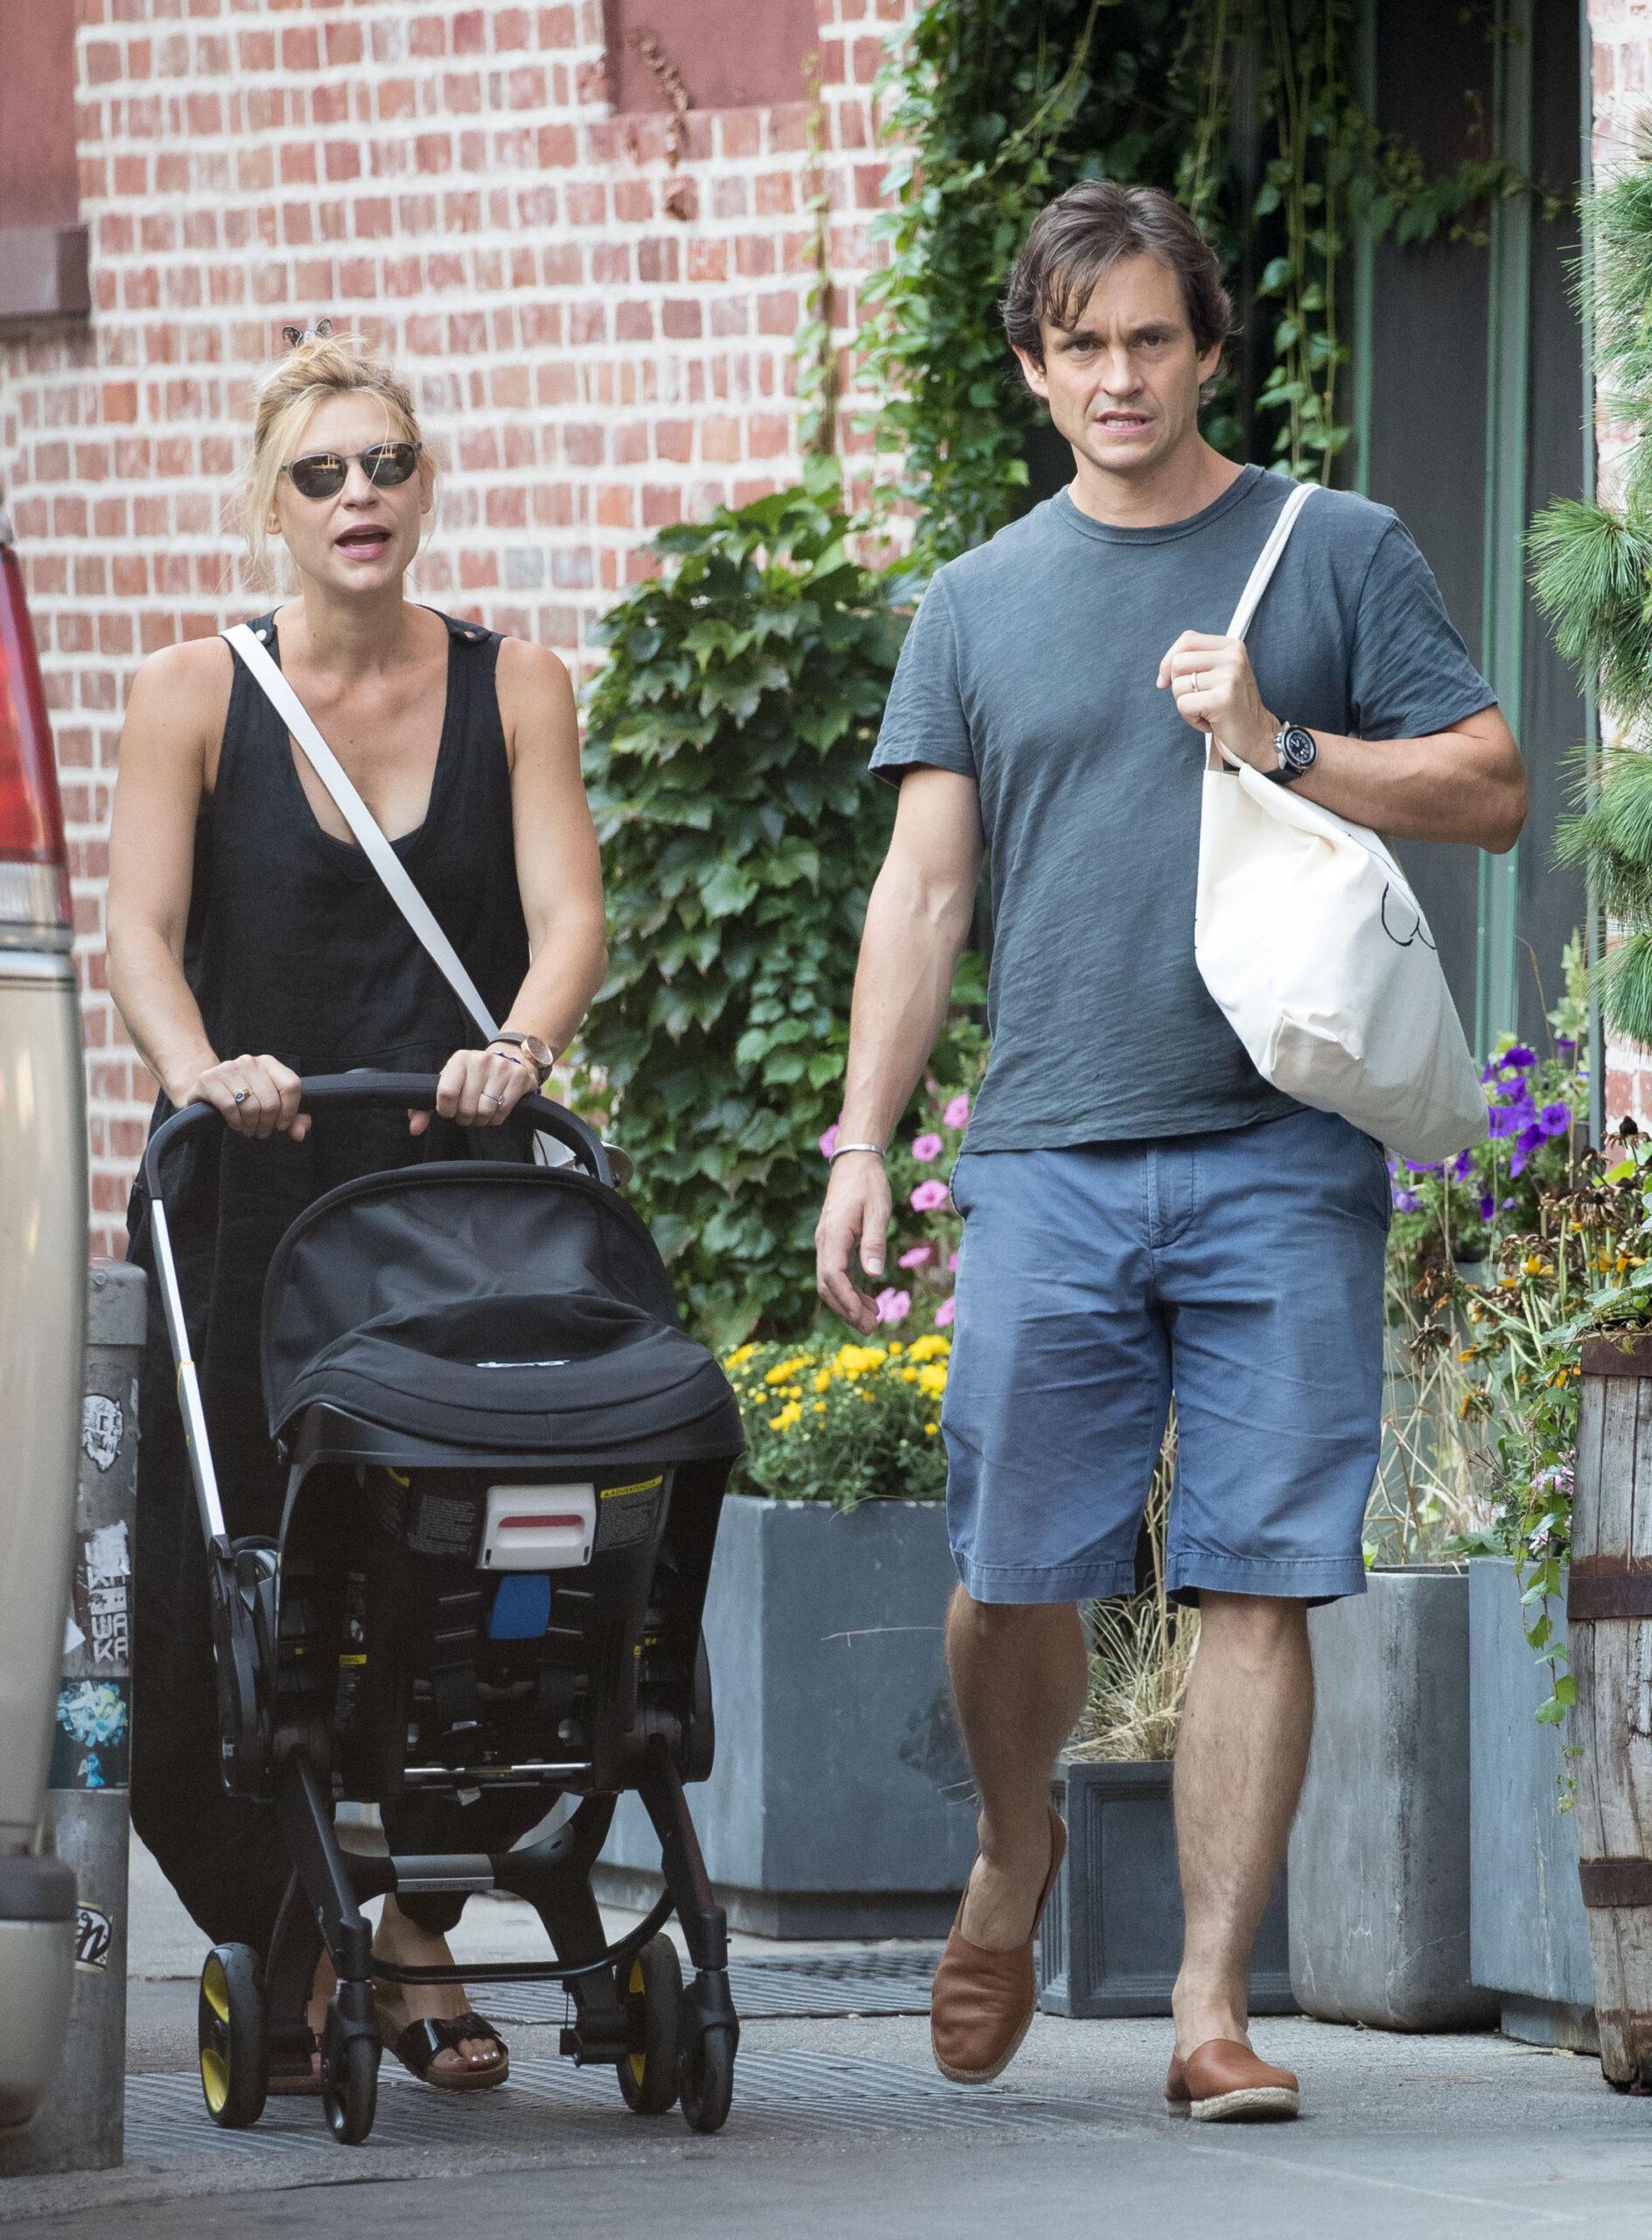 Claire Danes and Hugh Dancy taking there new born son for a walk in New York City